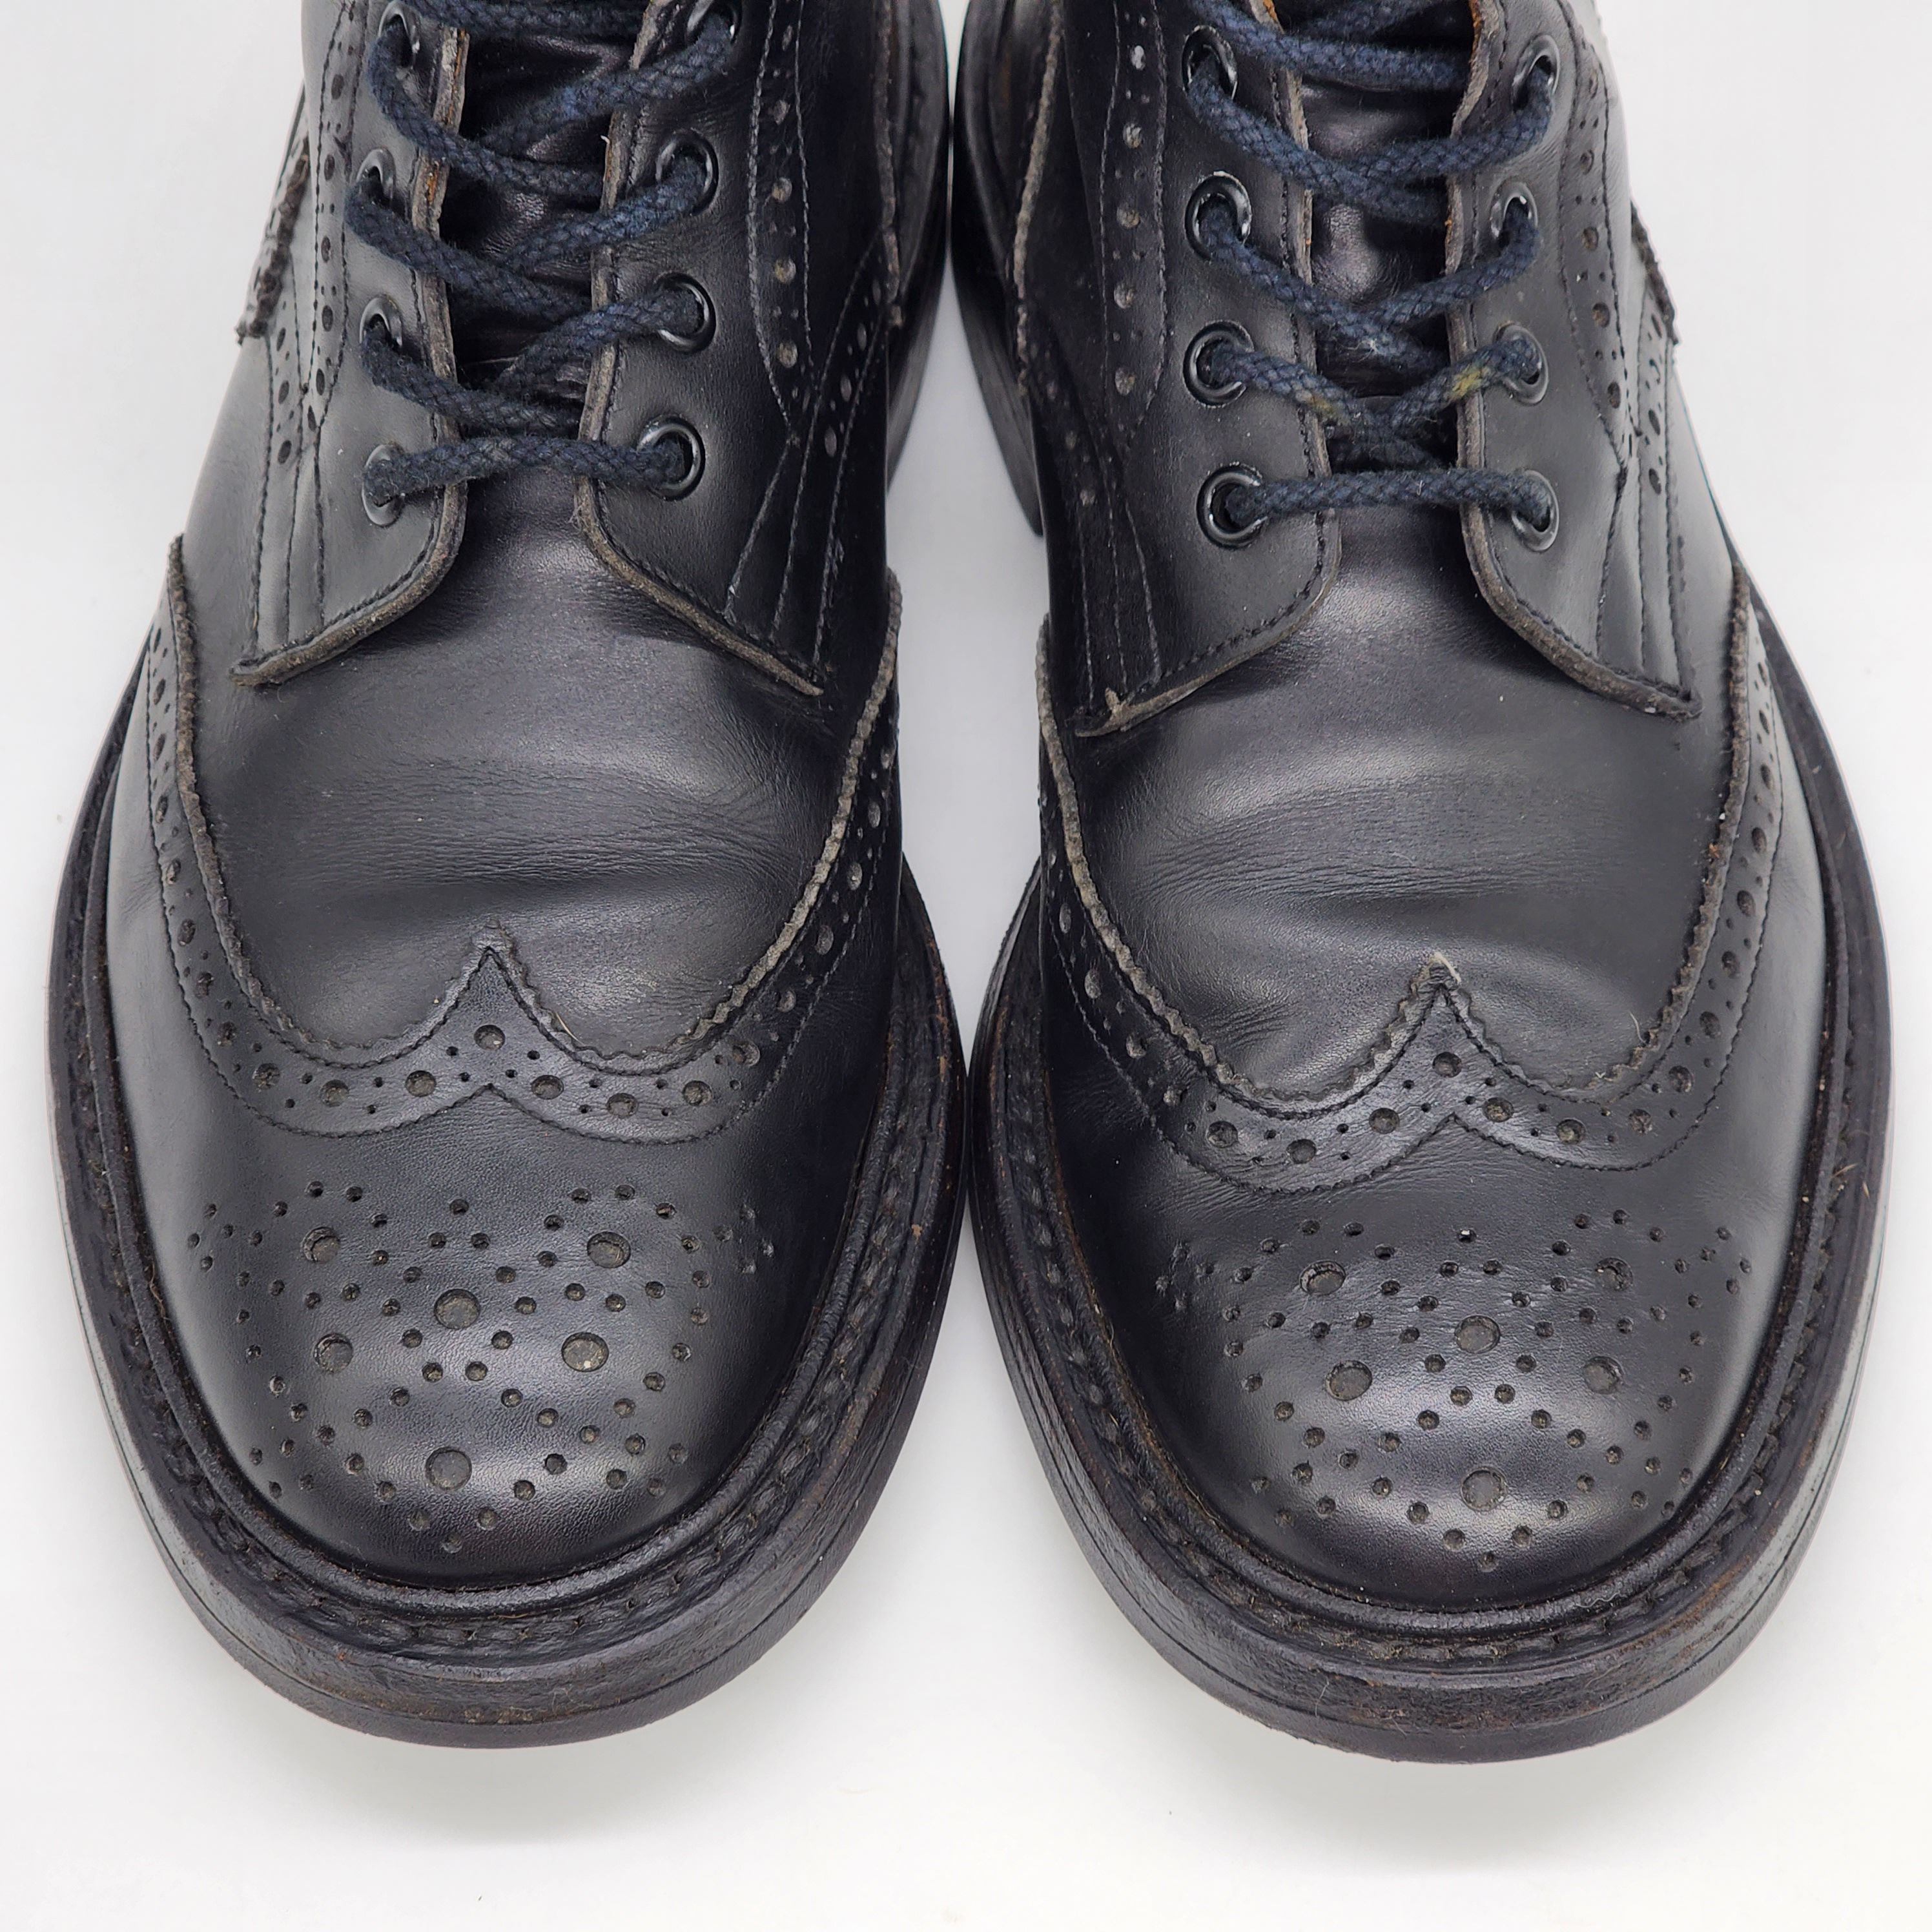 Trickers - Stow Boots - Black - 6